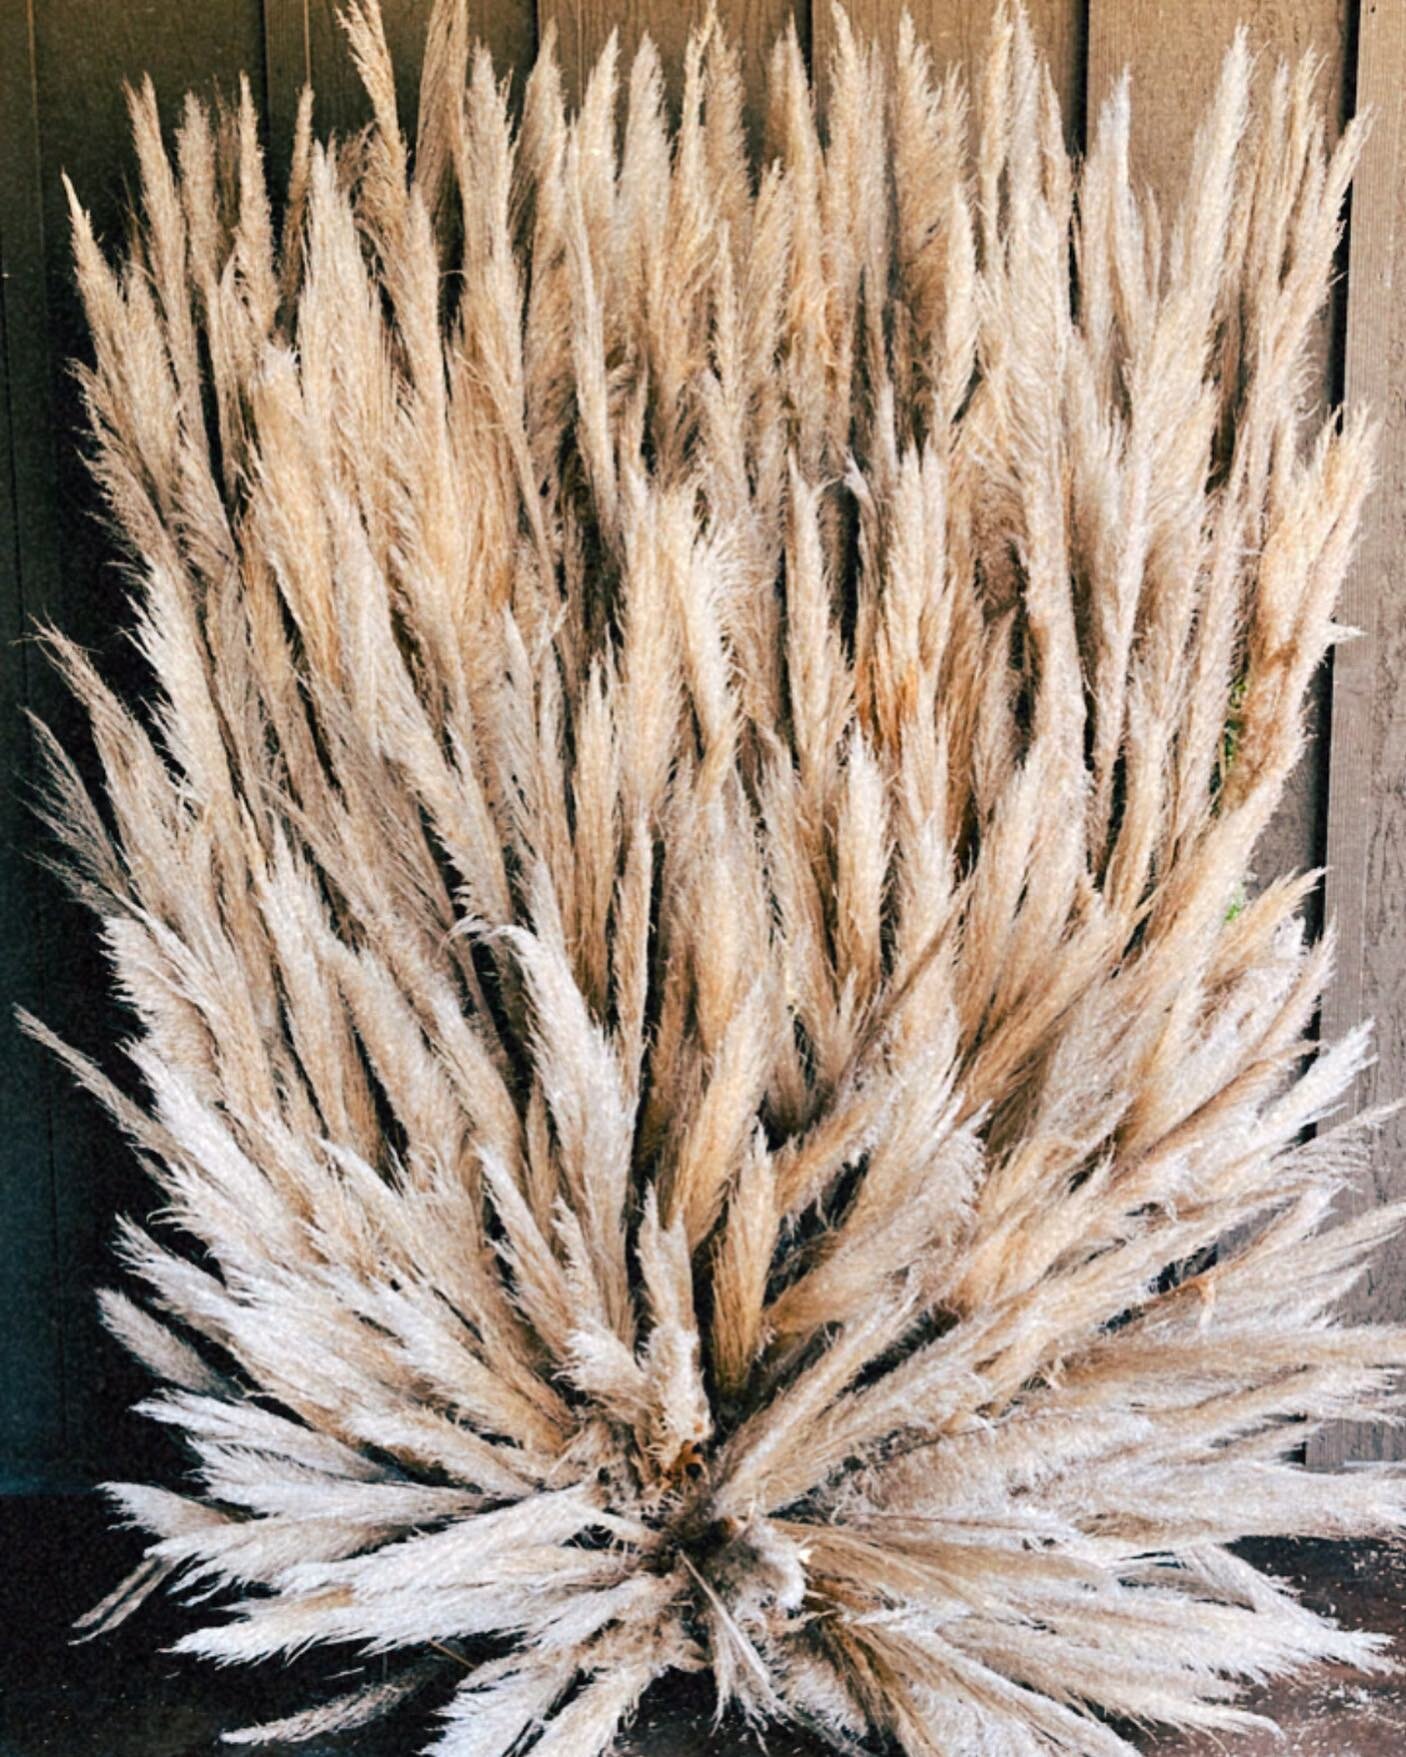 &amp; we are officially writing off pampas grass after this 600 stem photo backdrop 😅🌾✨